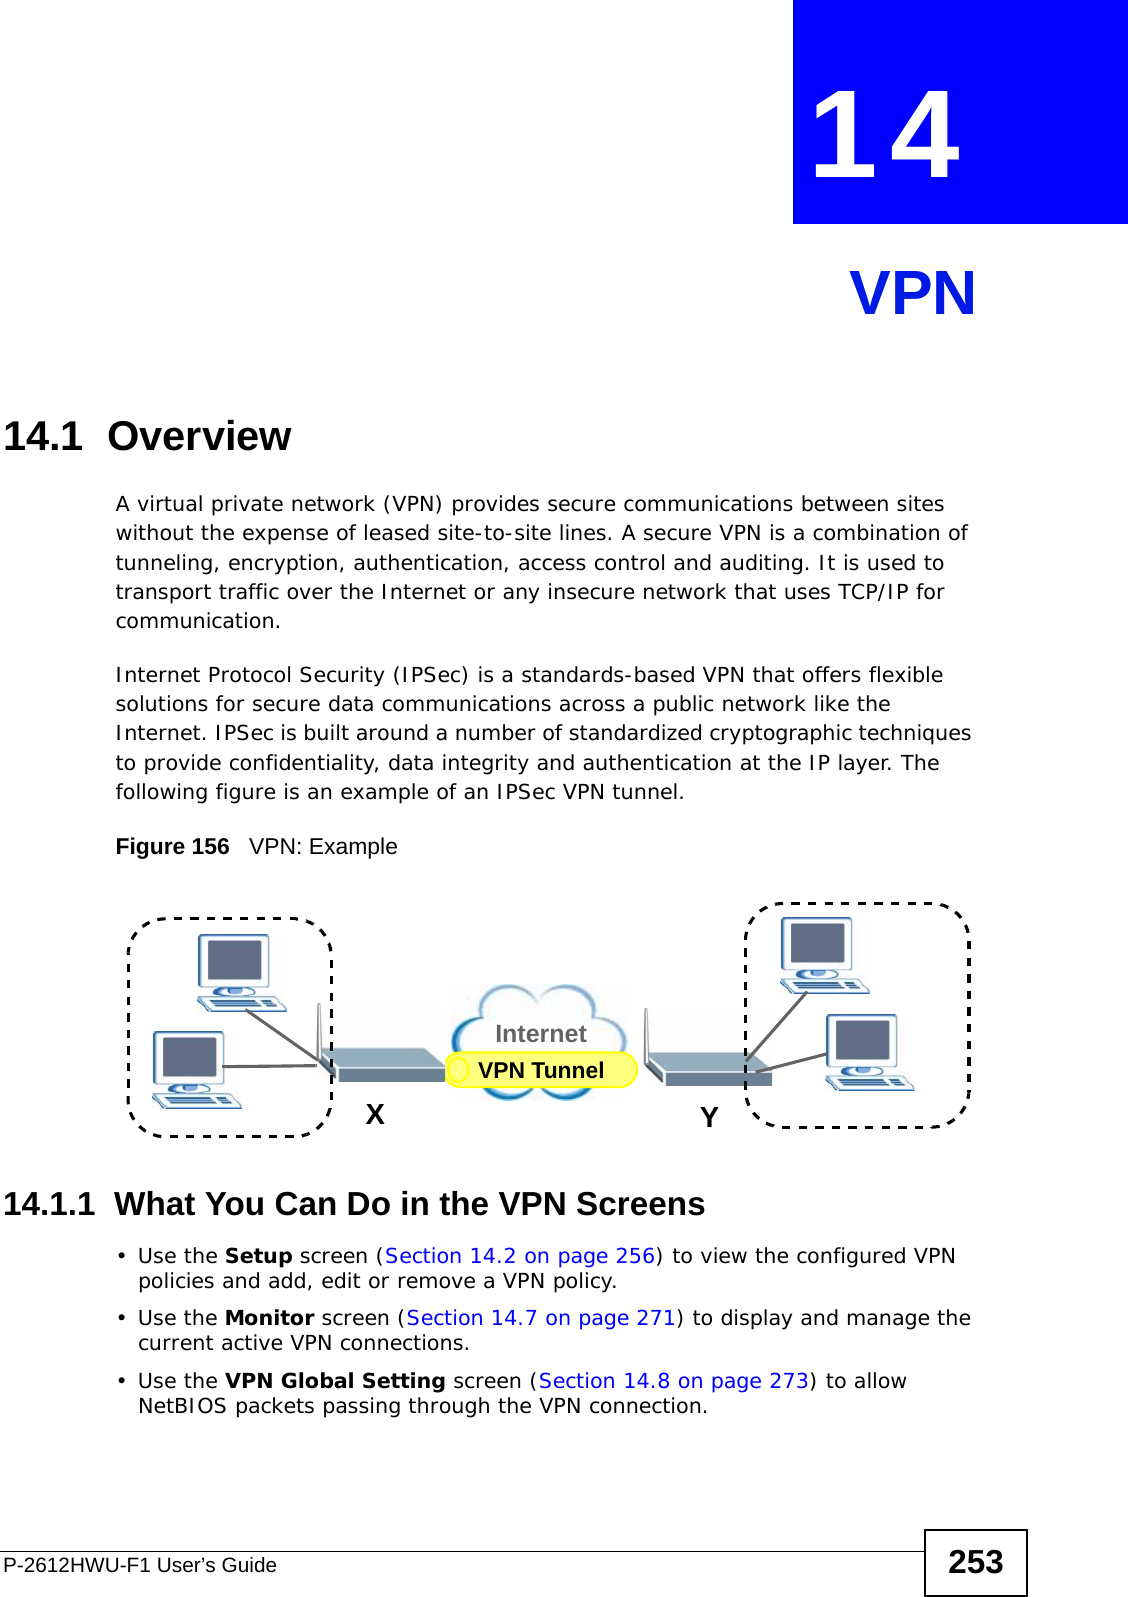 P-2612HWU-F1 User’s Guide 253CHAPTER  14 VPN14.1  OverviewA virtual private network (VPN) provides secure communications between sites without the expense of leased site-to-site lines. A secure VPN is a combination of tunneling, encryption, authentication, access control and auditing. It is used to transport traffic over the Internet or any insecure network that uses TCP/IP for communication.Internet Protocol Security (IPSec) is a standards-based VPN that offers flexible solutions for secure data communications across a public network like the Internet. IPSec is built around a number of standardized cryptographic techniques to provide confidentiality, data integrity and authentication at the IP layer. The following figure is an example of an IPSec VPN tunnel.Figure 156   VPN: Example14.1.1  What You Can Do in the VPN Screens•Use the Setup screen (Section 14.2 on page 256) to view the configured VPN policies and add, edit or remove a VPN policy.•Use the Monitor screen (Section 14.7 on page 271) to display and manage the current active VPN connections.•Use the VPN Global Setting screen (Section 14.8 on page 273) to allow NetBIOS packets passing through the VPN connection.VPN TunnelXYInternet